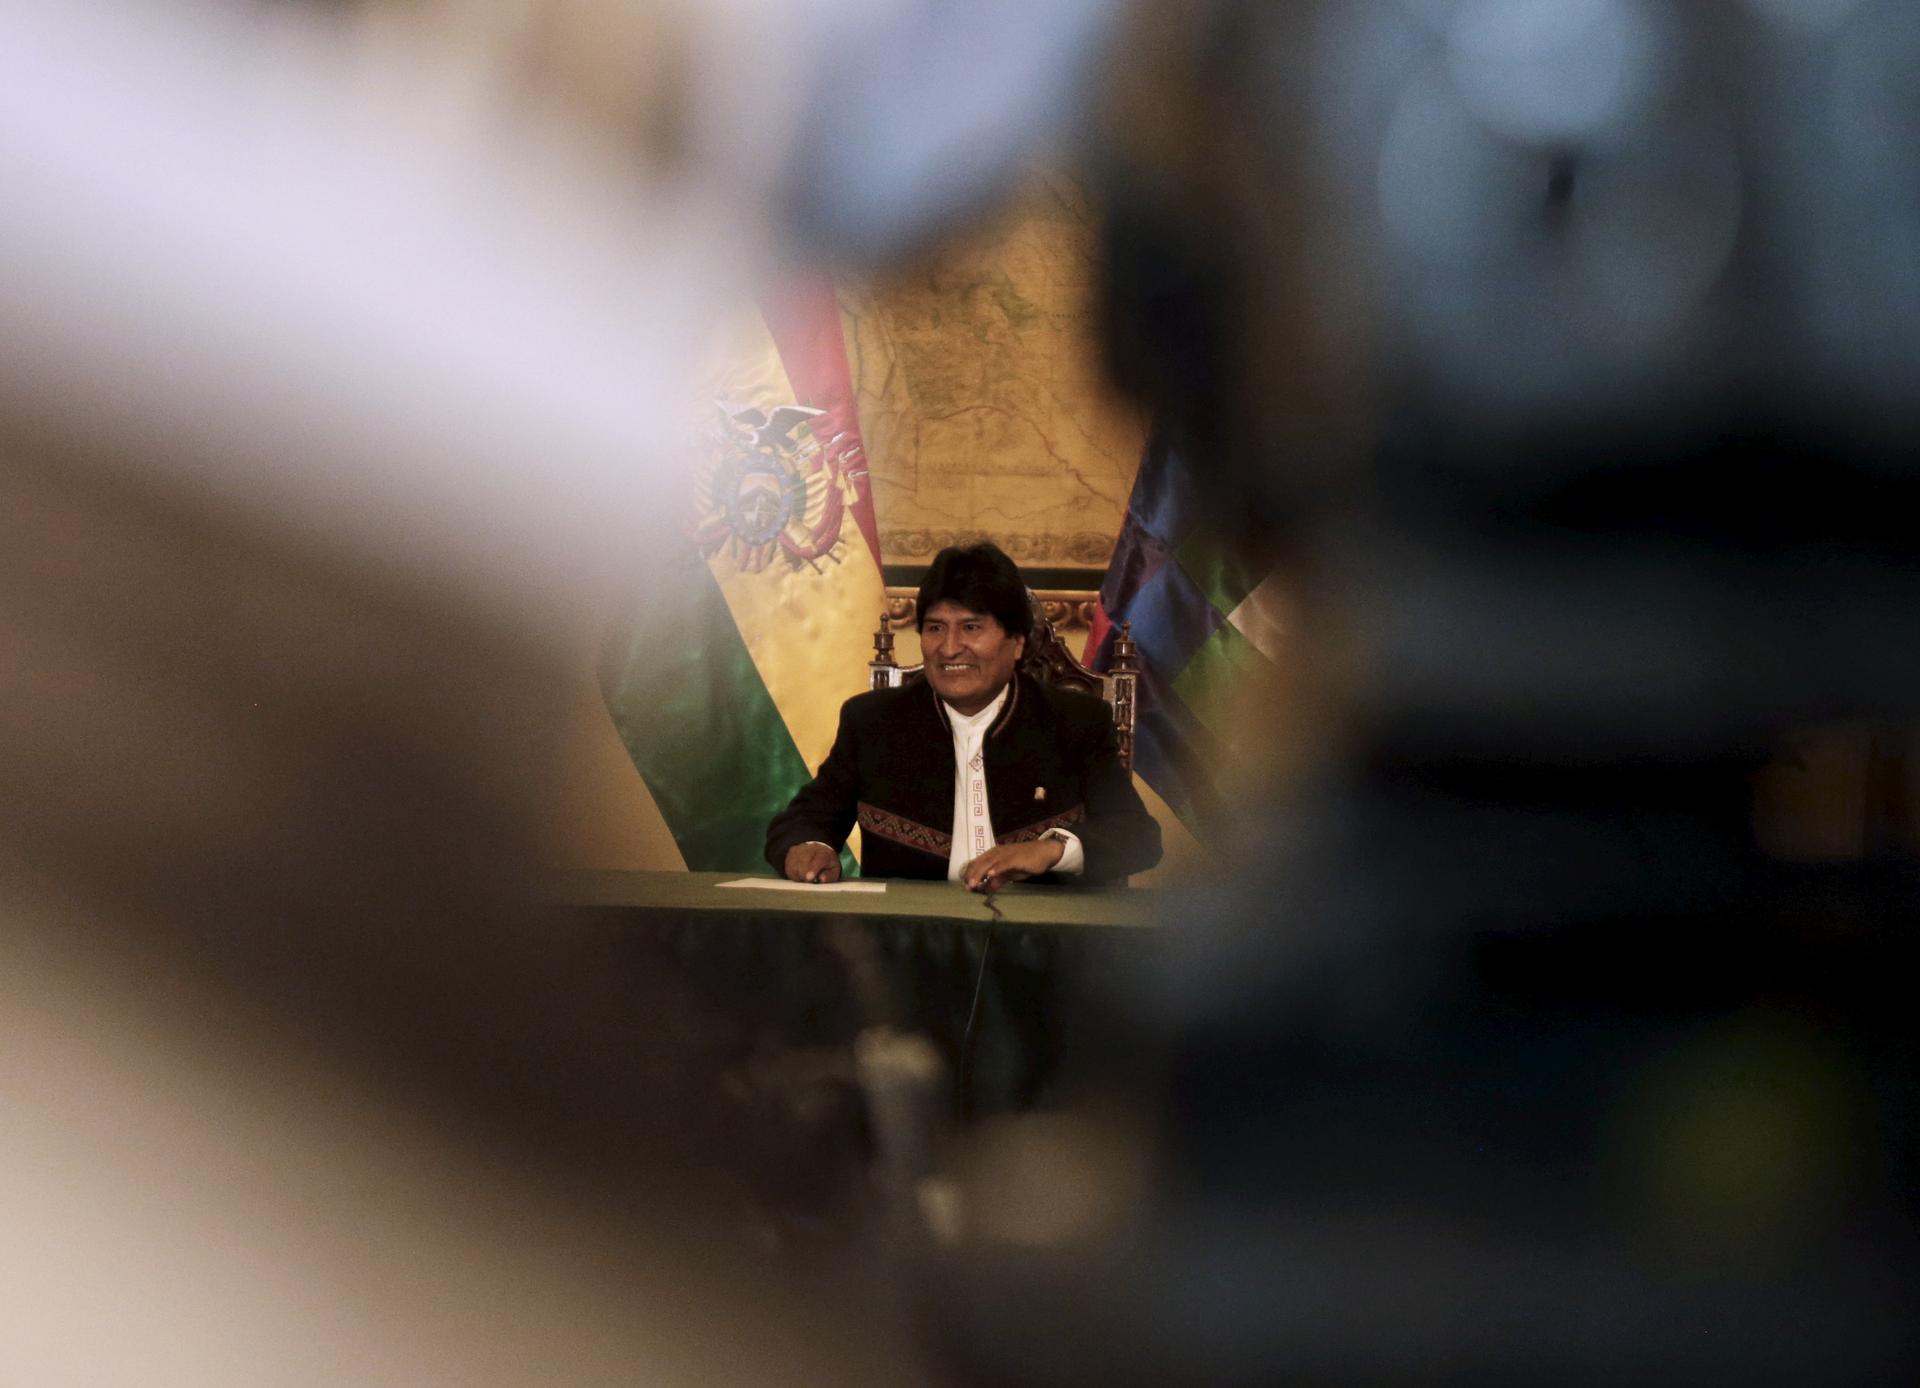 President Evo Morales holds a news conference at the presidential palace in La Paz, Bolivia on Feb. 22, 2016. Morales asked Bolivians on Monday to wait "calmly" for the official result of Sunday's referendum on whether he should be allowed to run for re-e